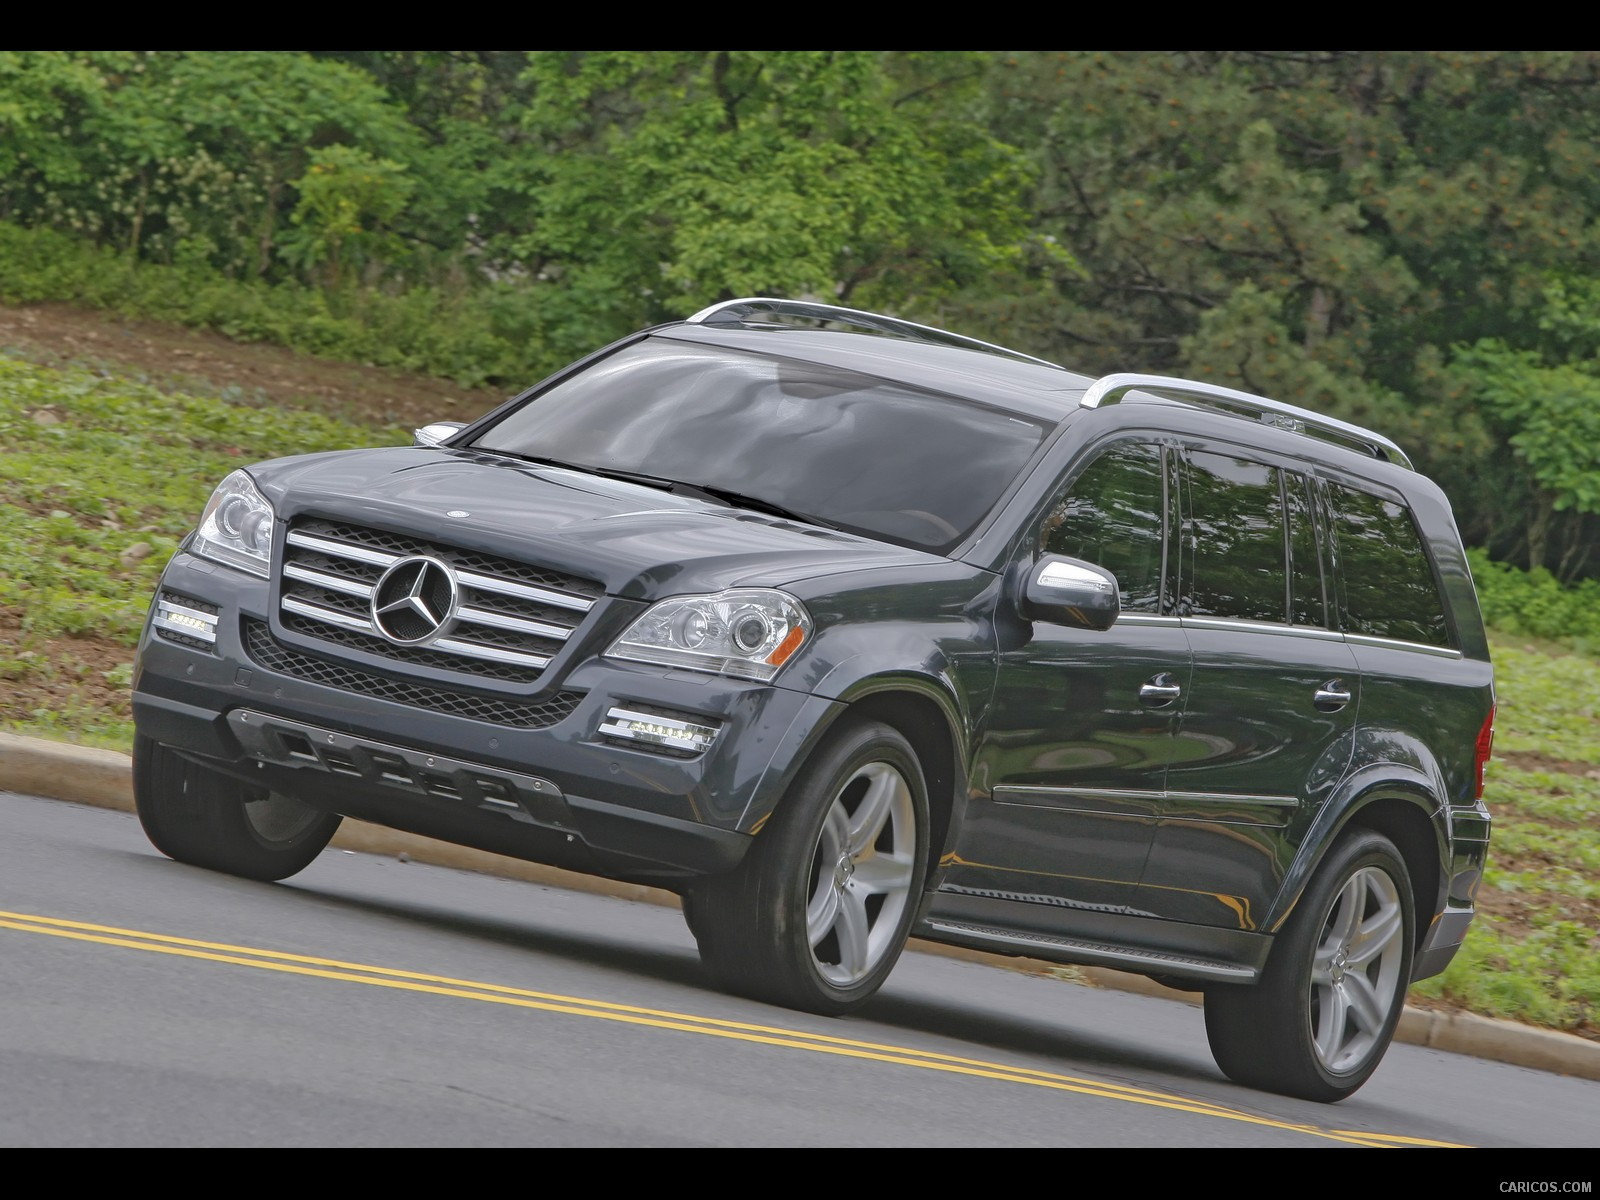 2010 Mercedes-Benz GL550 - Front, #39 of 112